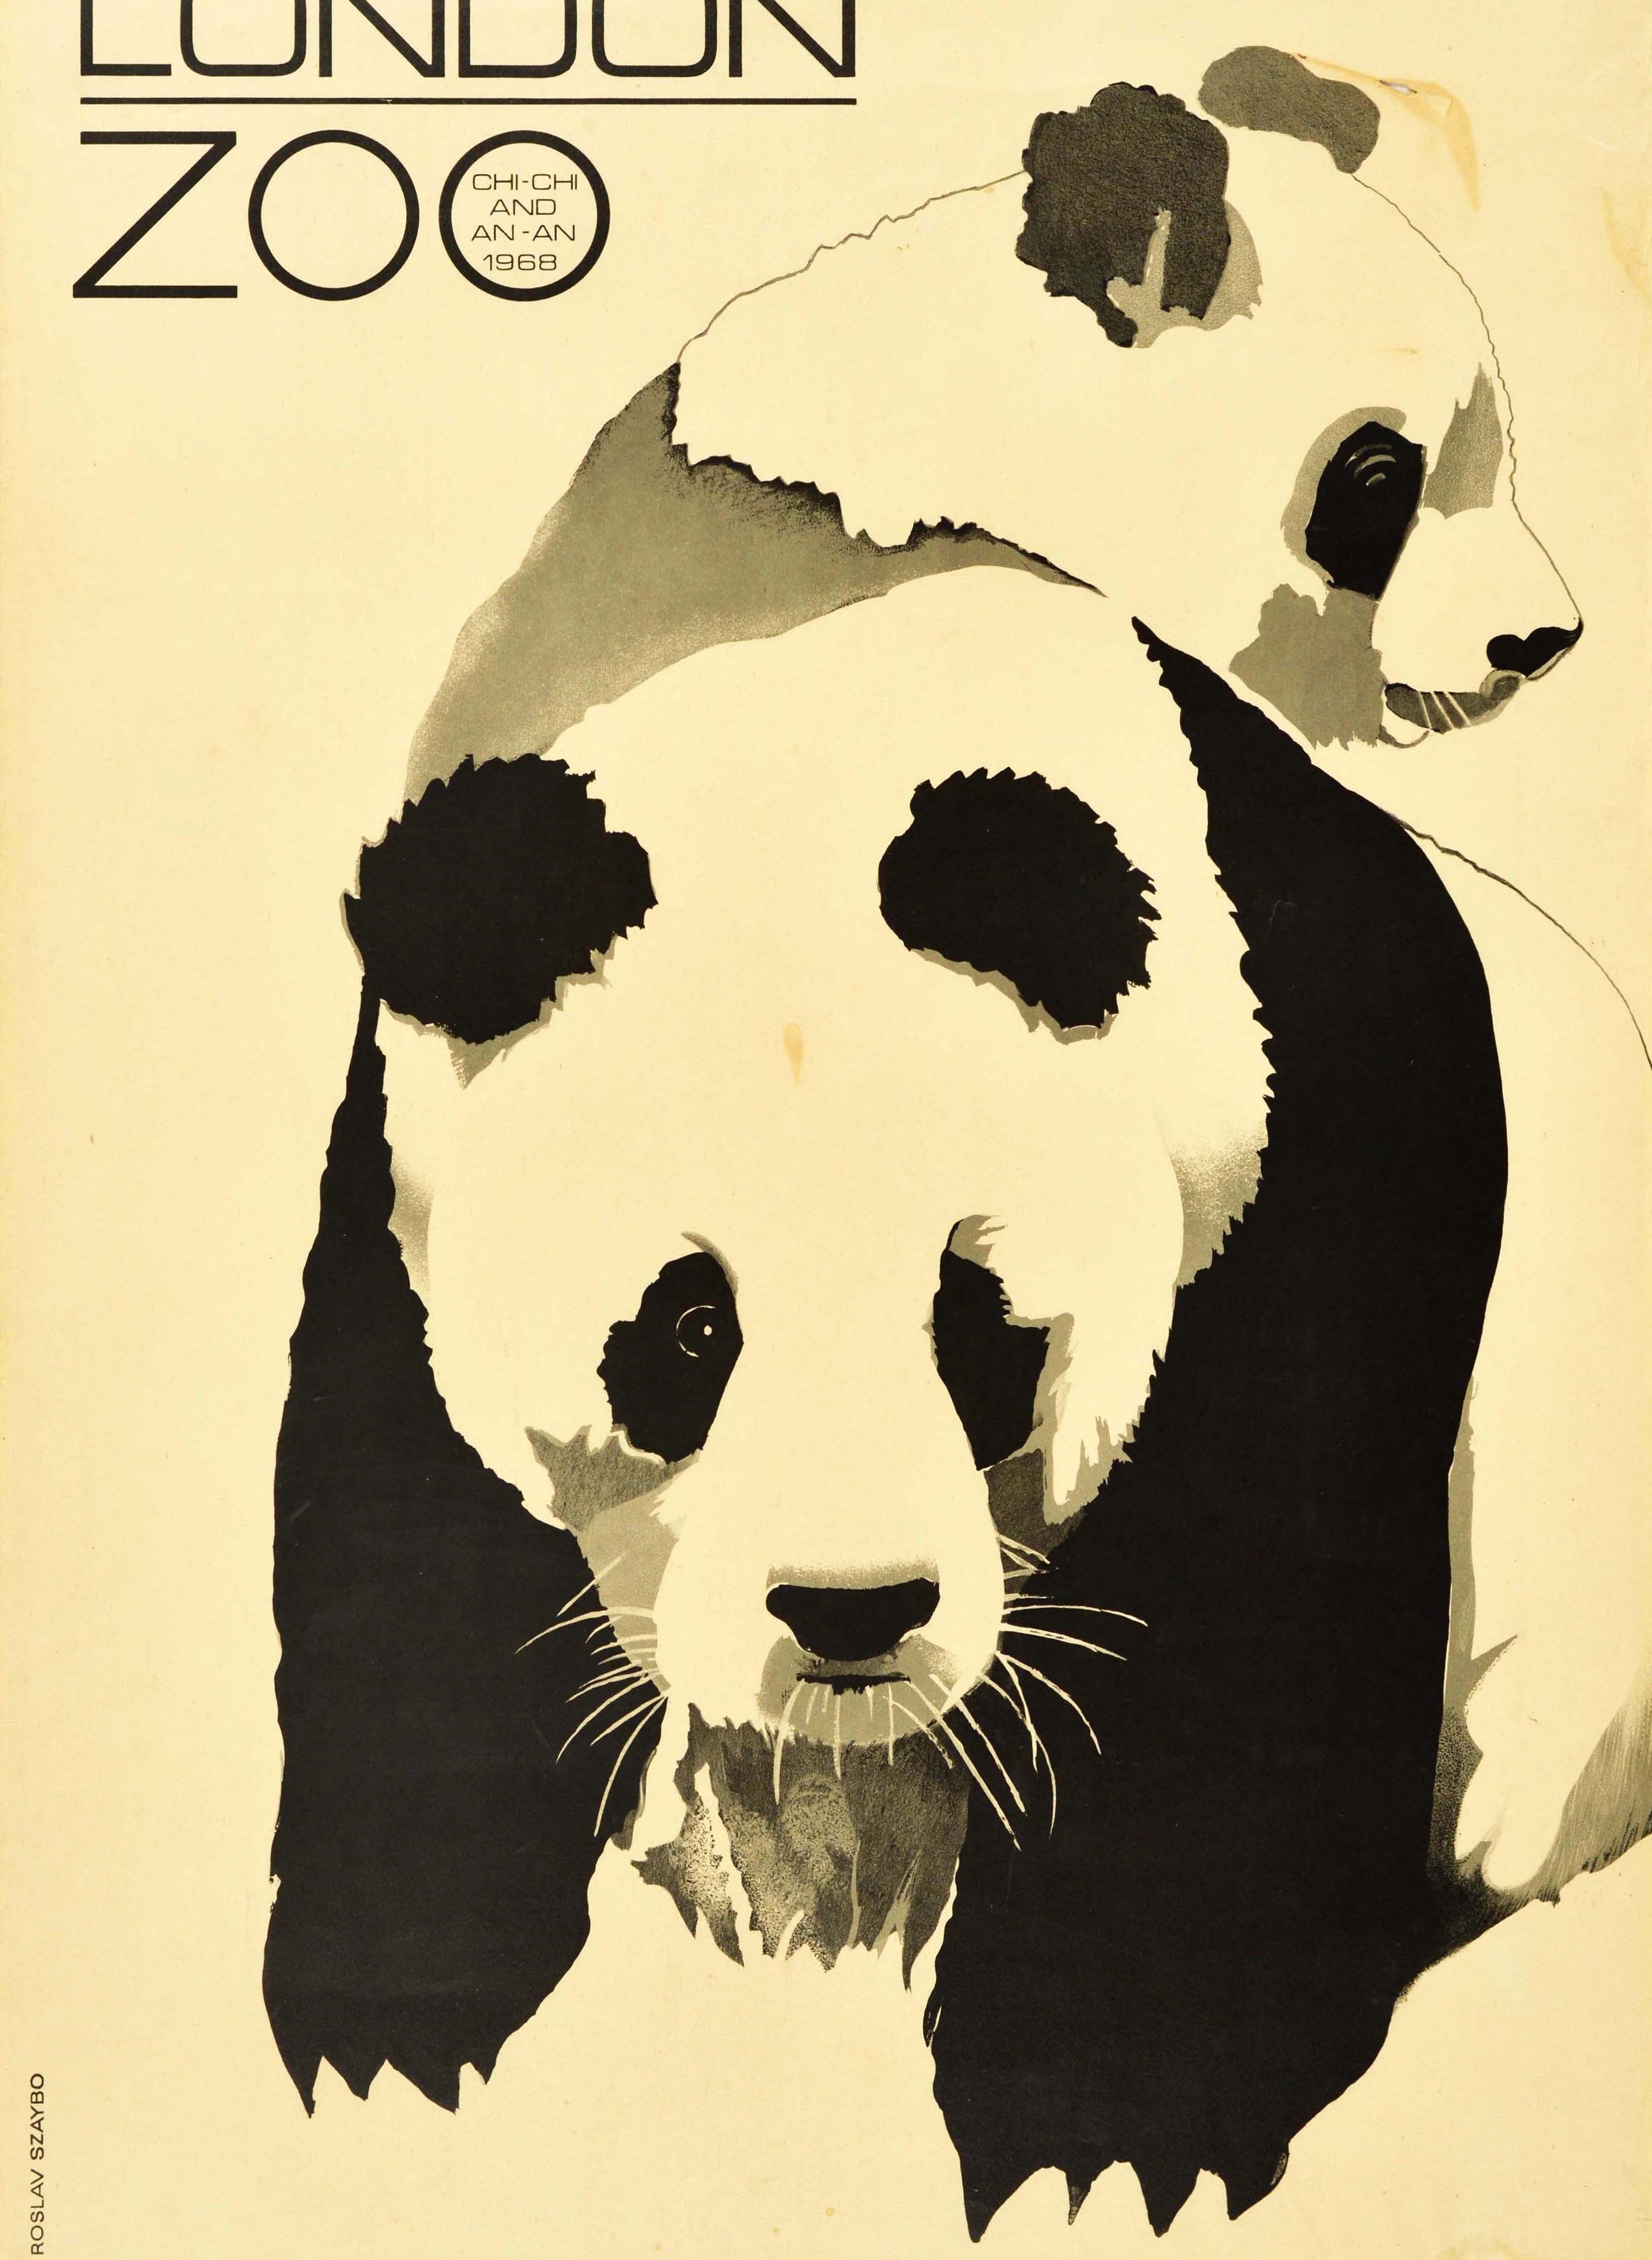 Roslav Szaybo - Original Vintage Poster London Zoo Chi Chi And An An 1968  Giant Panda Design WWF For Sale at 1stDibs